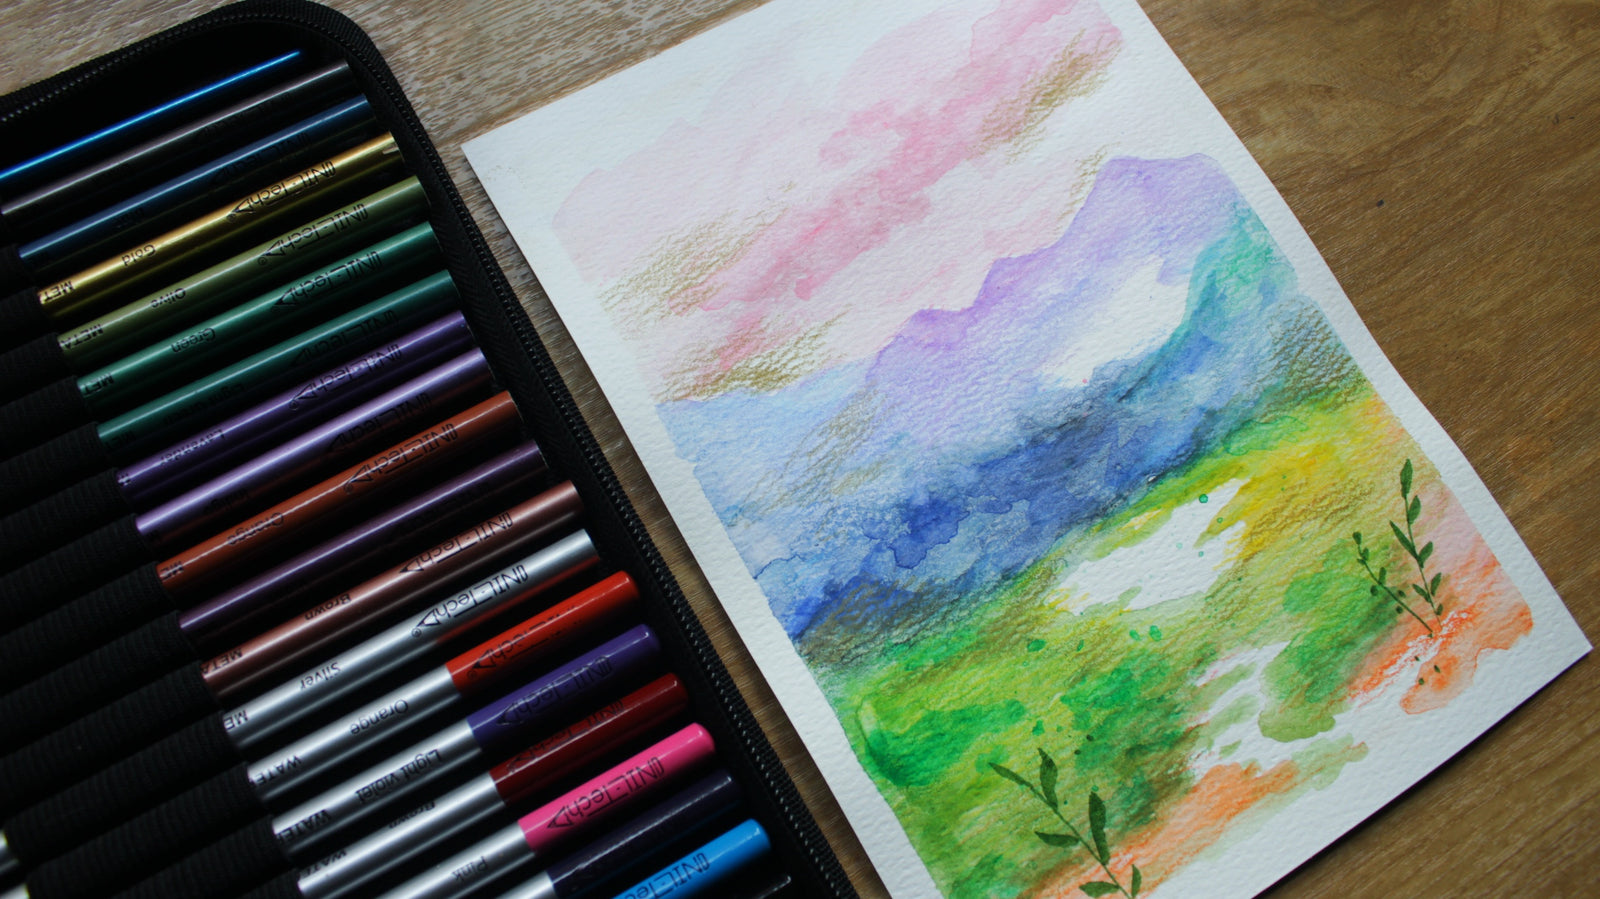 14,593 Color Pencil Landscape Royalty-Free Photos and Stock Images |  Shutterstock